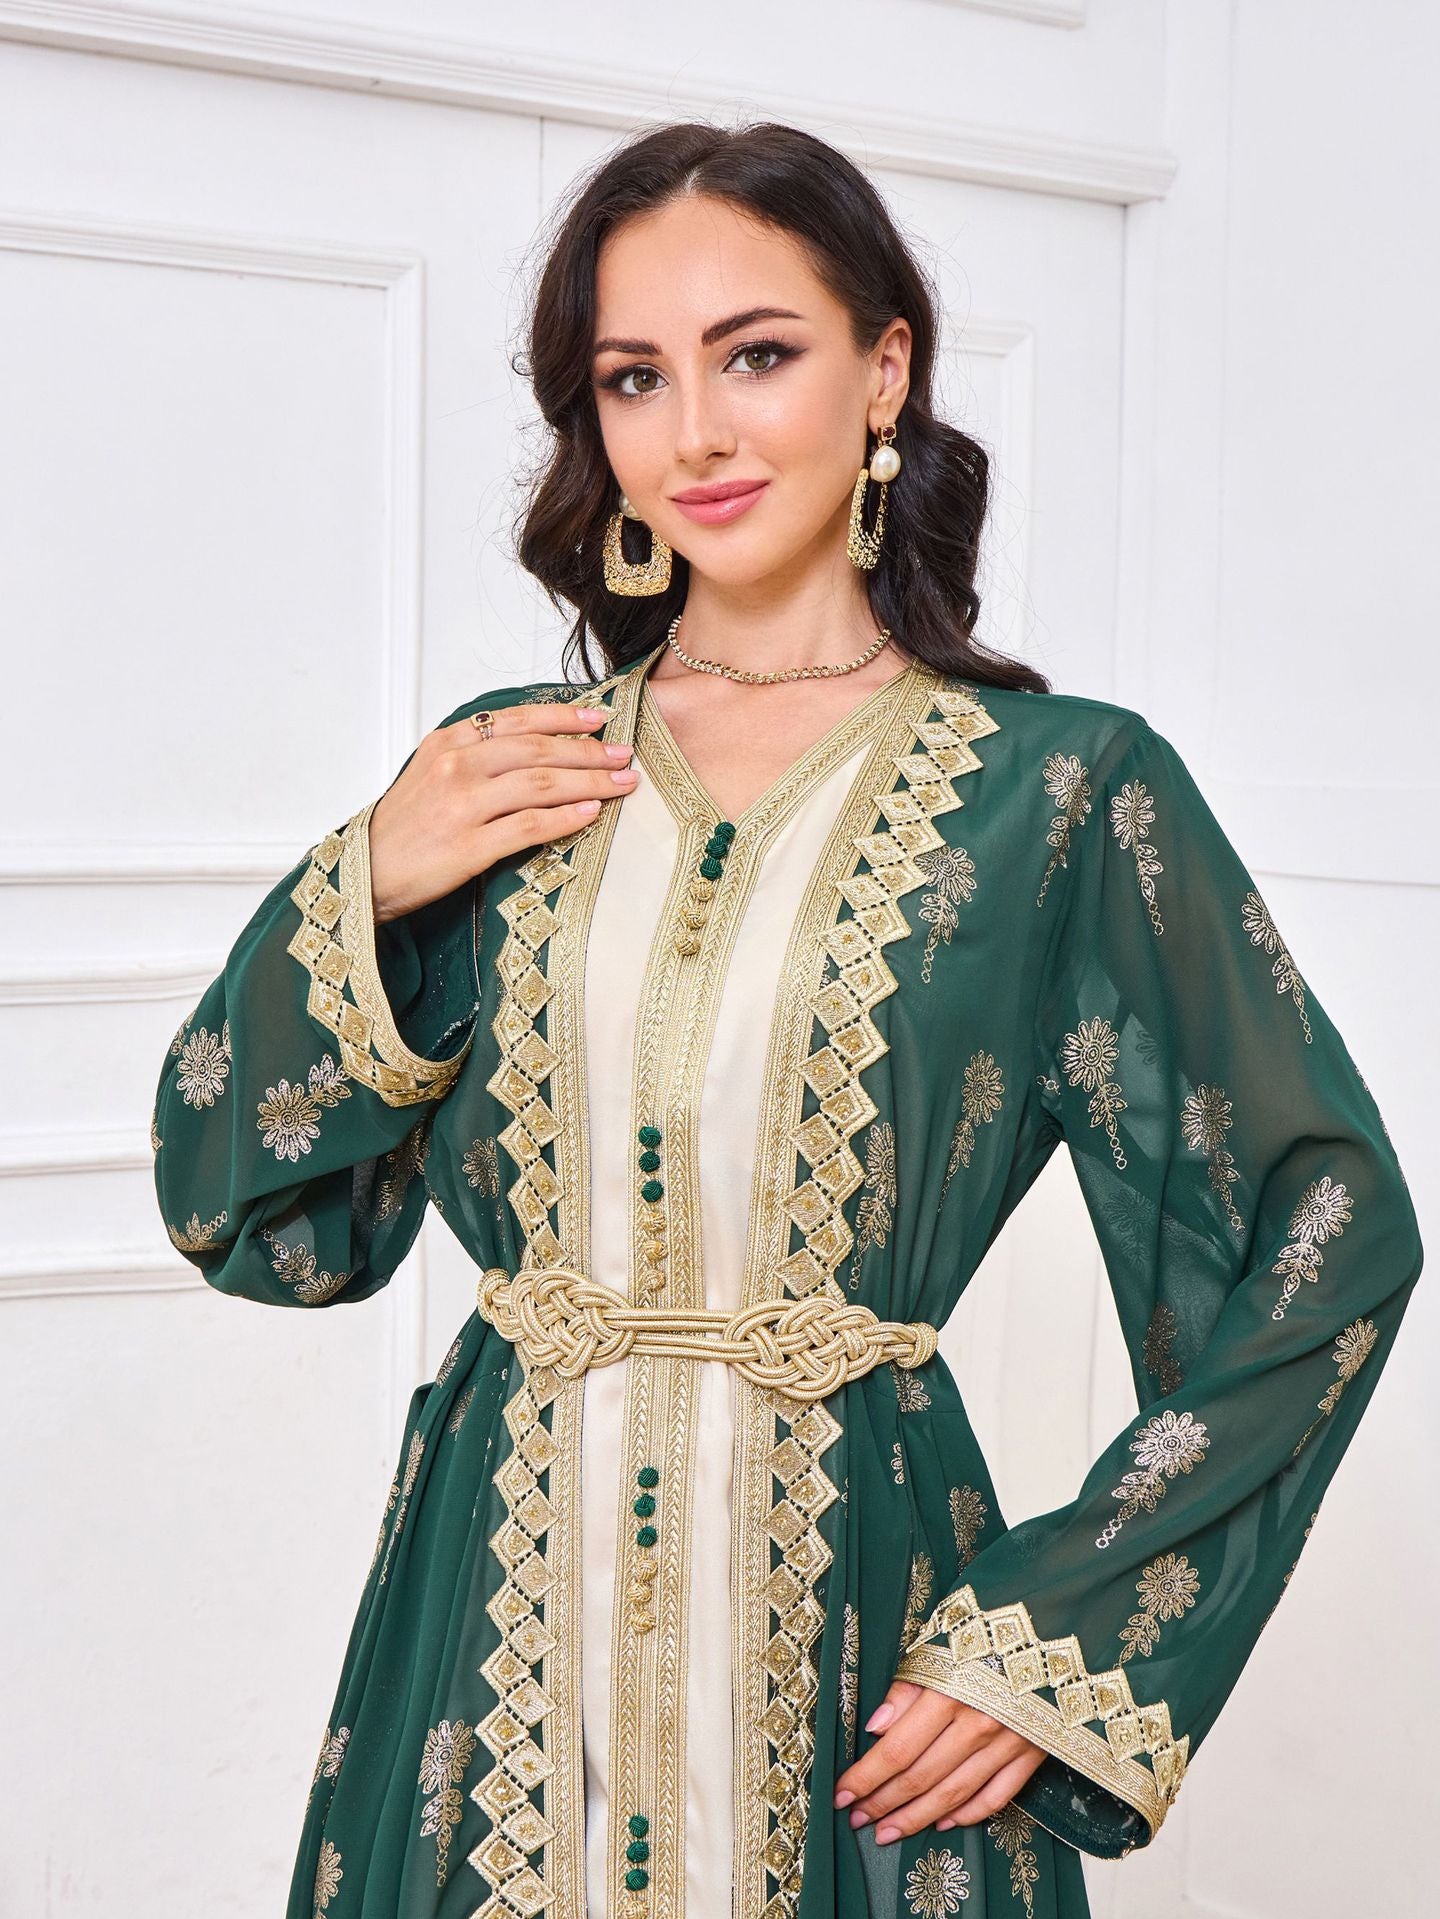 Women's Arabic Embroidered Cardigan Vest Two-piece Set Dress